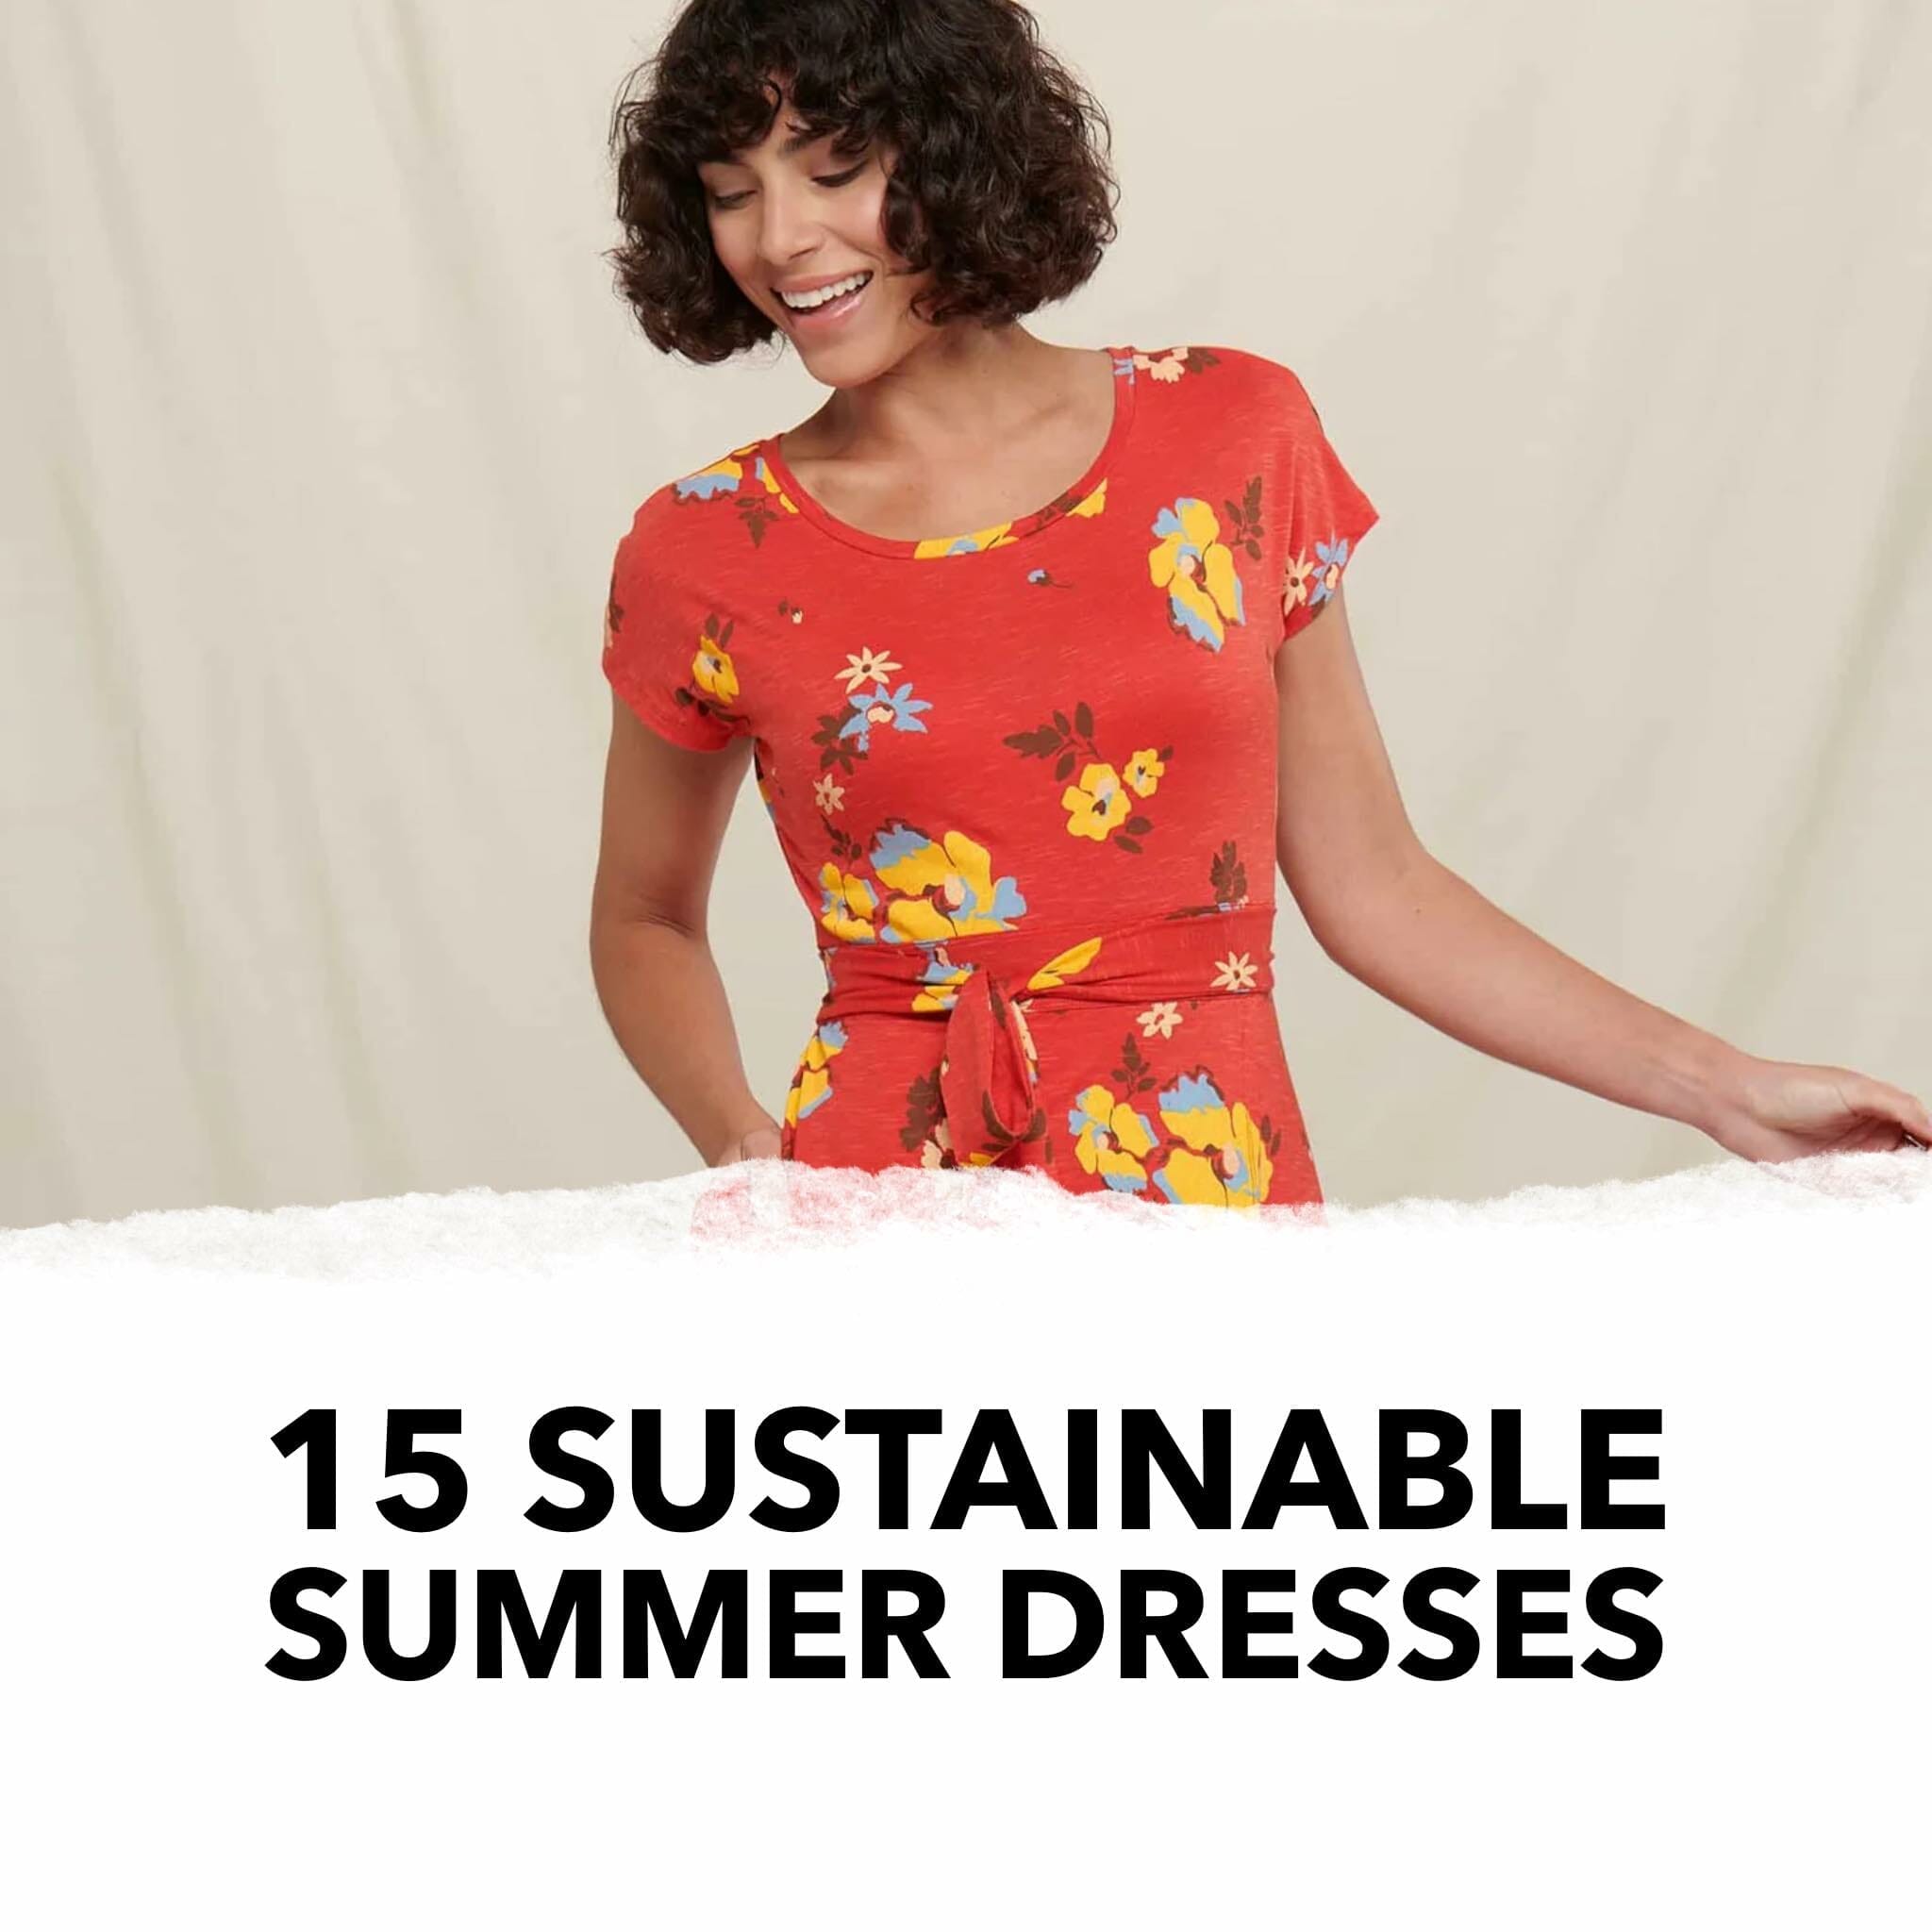 15 Sustainable Summer Dresses